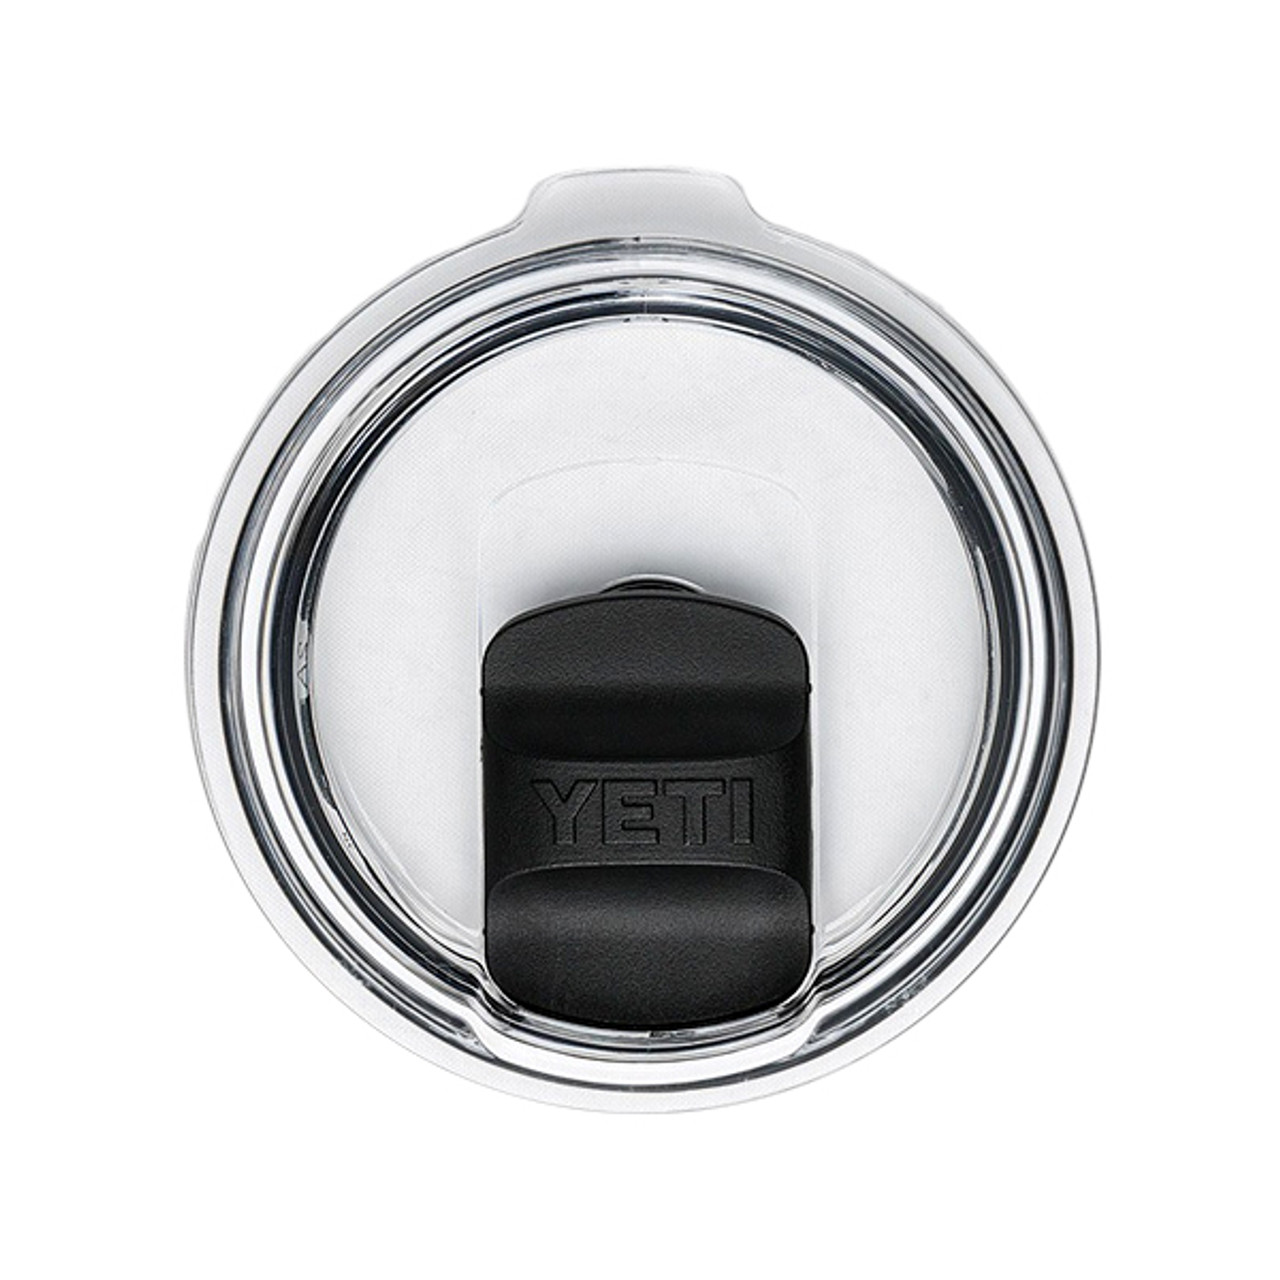 Yeti Colored Magslider Replacement Magnet fits lids for 20-30